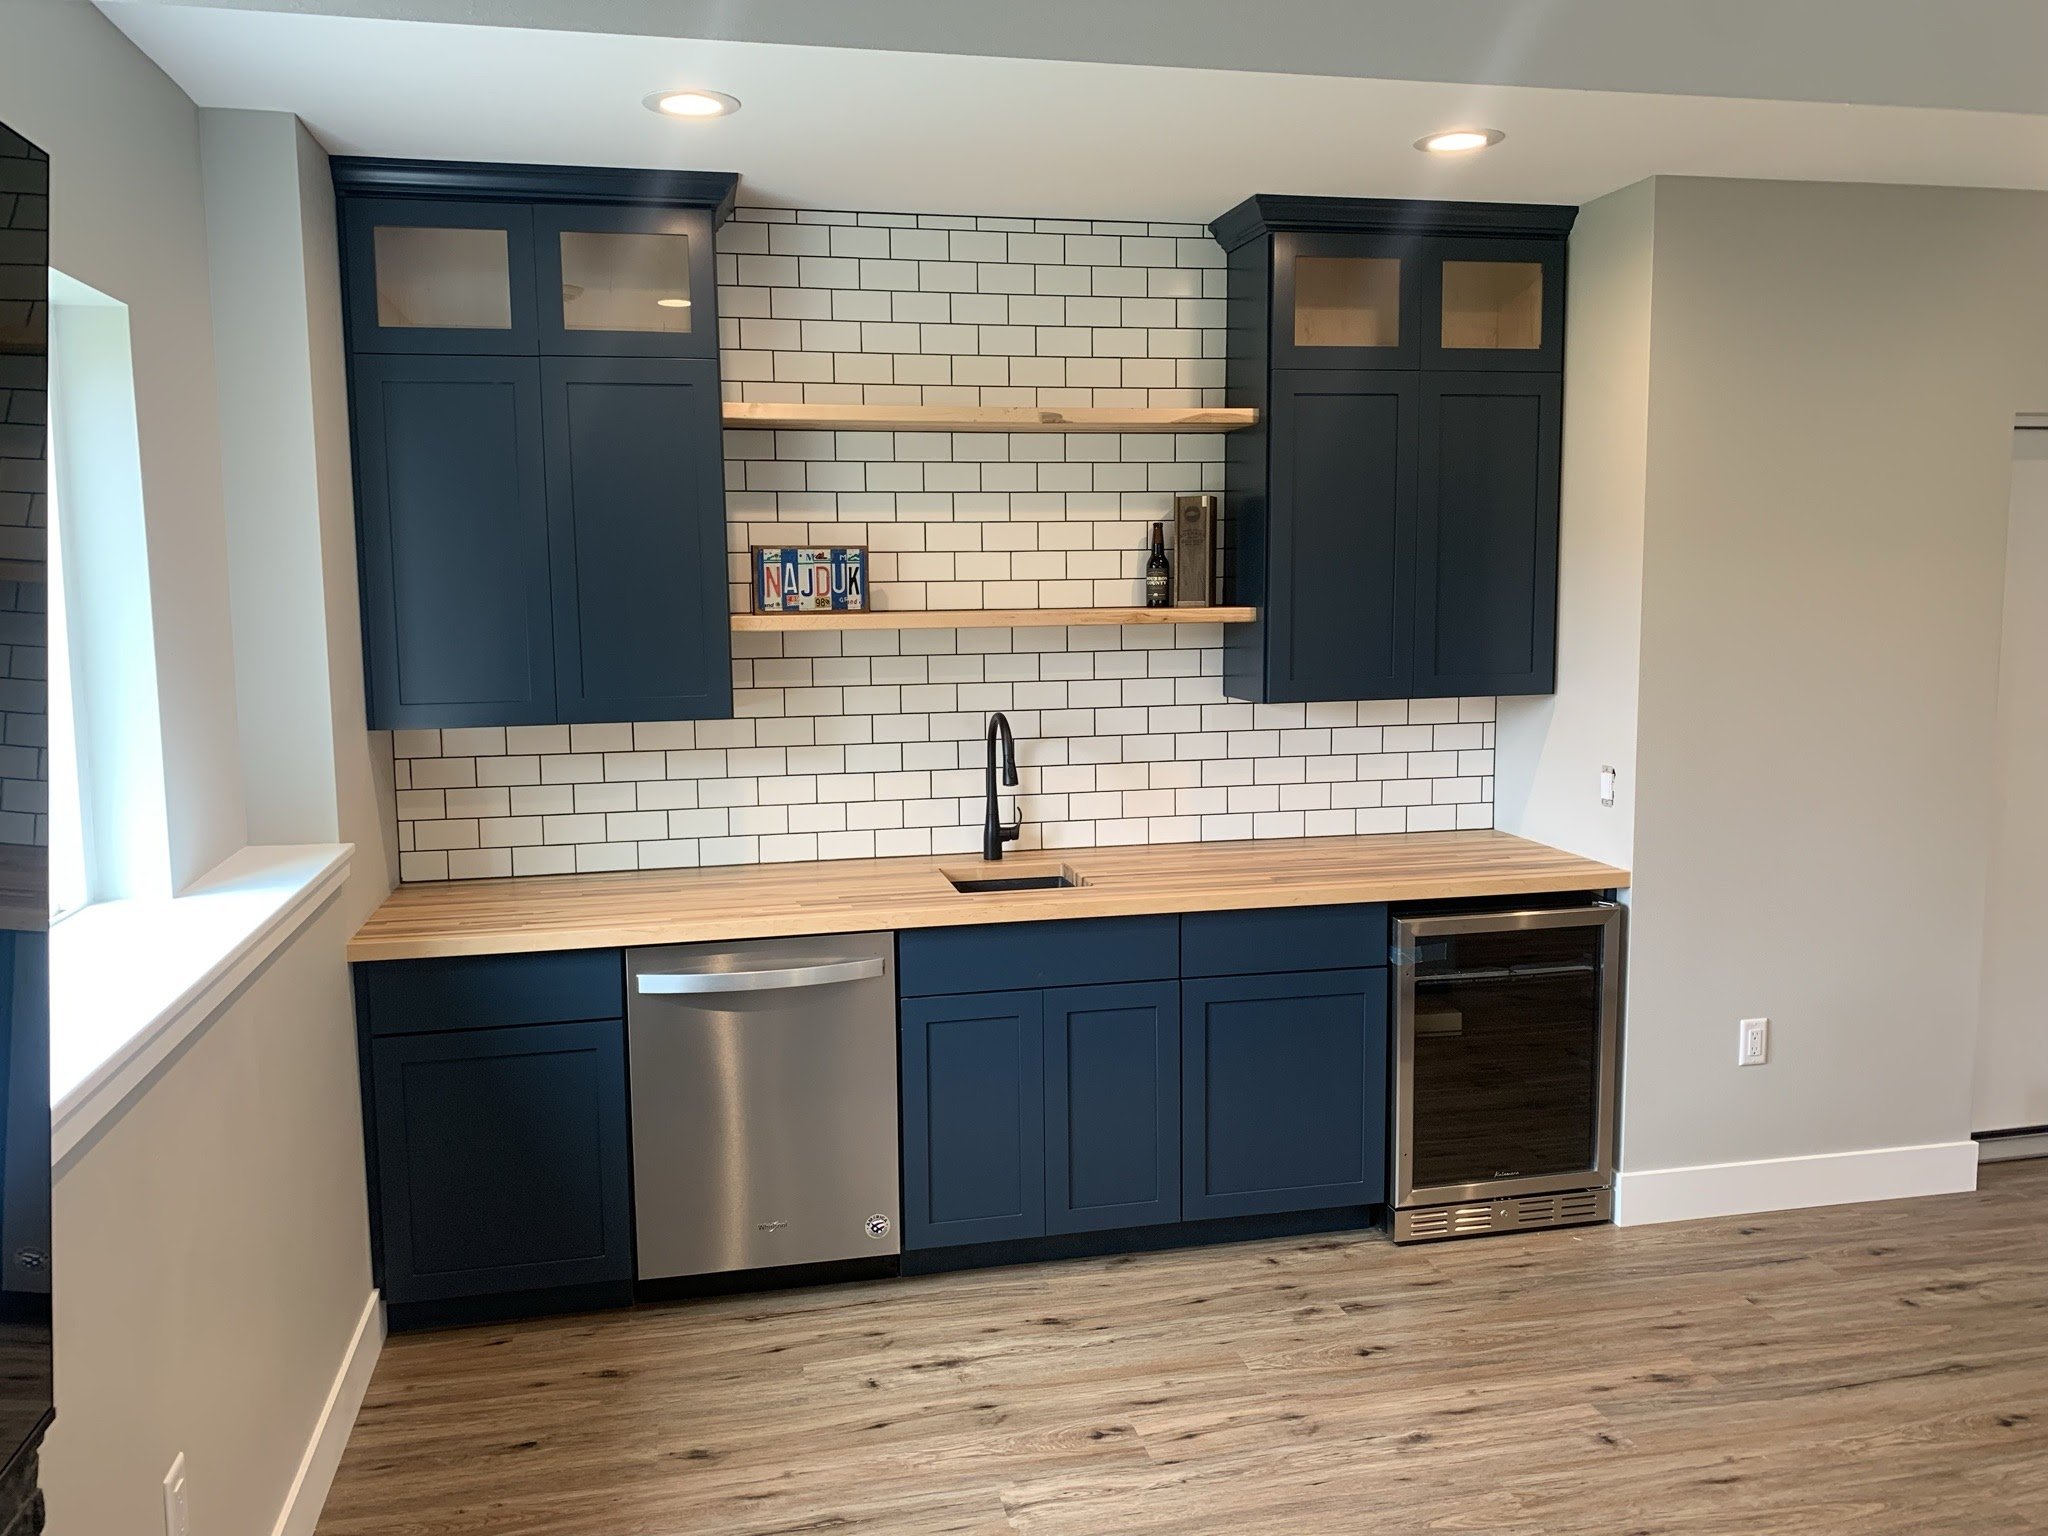 Basement wet bar with blue cabinets and subway tile